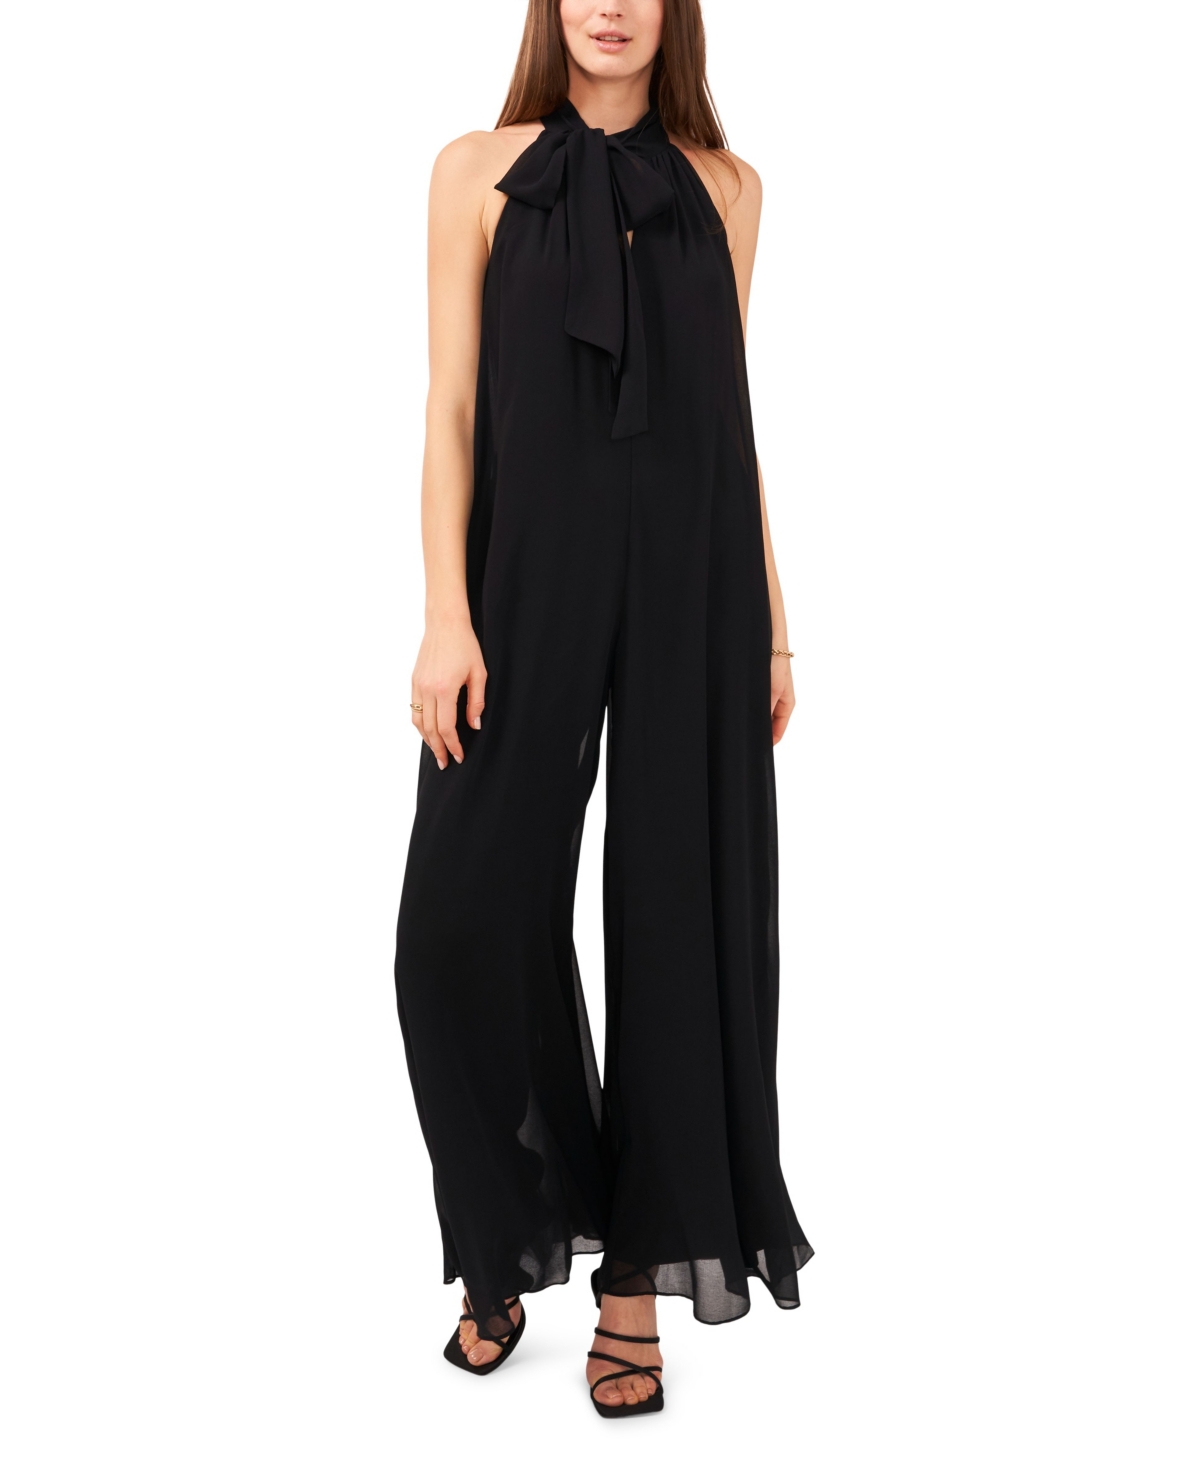  1.state Women's Solid Sleeveless Tie-Neck Jumpsuit